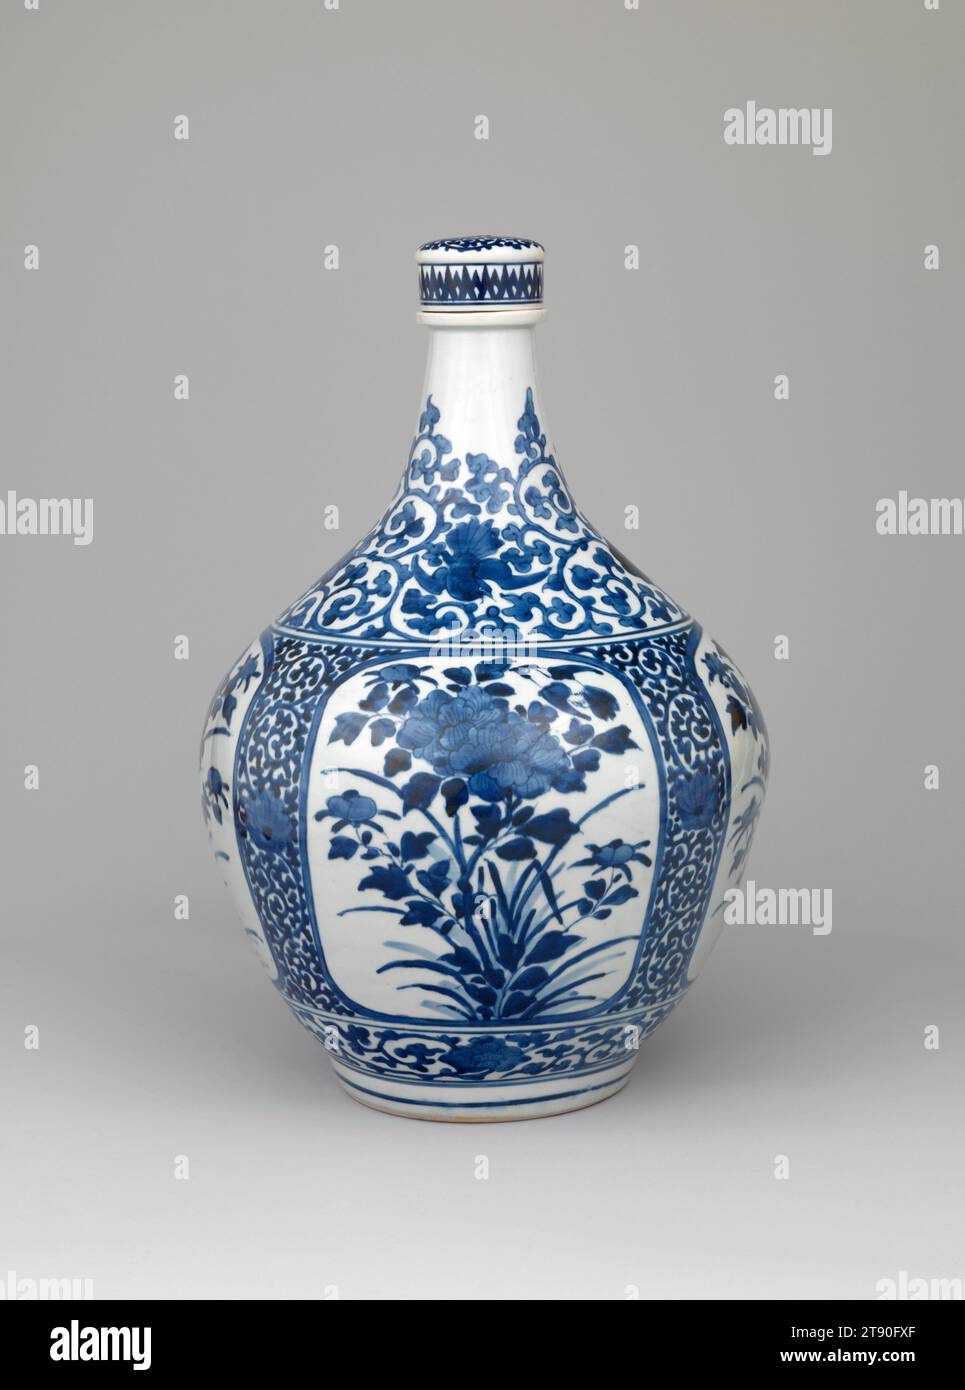 Apothecary bottle with mynas and peonies, c. 1660-1680, Unknown Japanese, 20 1/4 × 13 3/8 × 13 3/8 in. (51.44 × 33.97 × 33.97 cm), Imari ware; porcelain with underglaze cobalt blue, Japan, 17th century, In the 1500s and 1600s, blue-and-white porcelains made at China’s famed Jingdezhen kilns were extremely popular in Europe, where the technology required to produce porcelain would not be known for another 200 years. When the Jingdezhen kilns entered a period of decline in the mid-1700s, porcelain makers in a town in far western Japan called Arita seized the opportunity Stock Photo